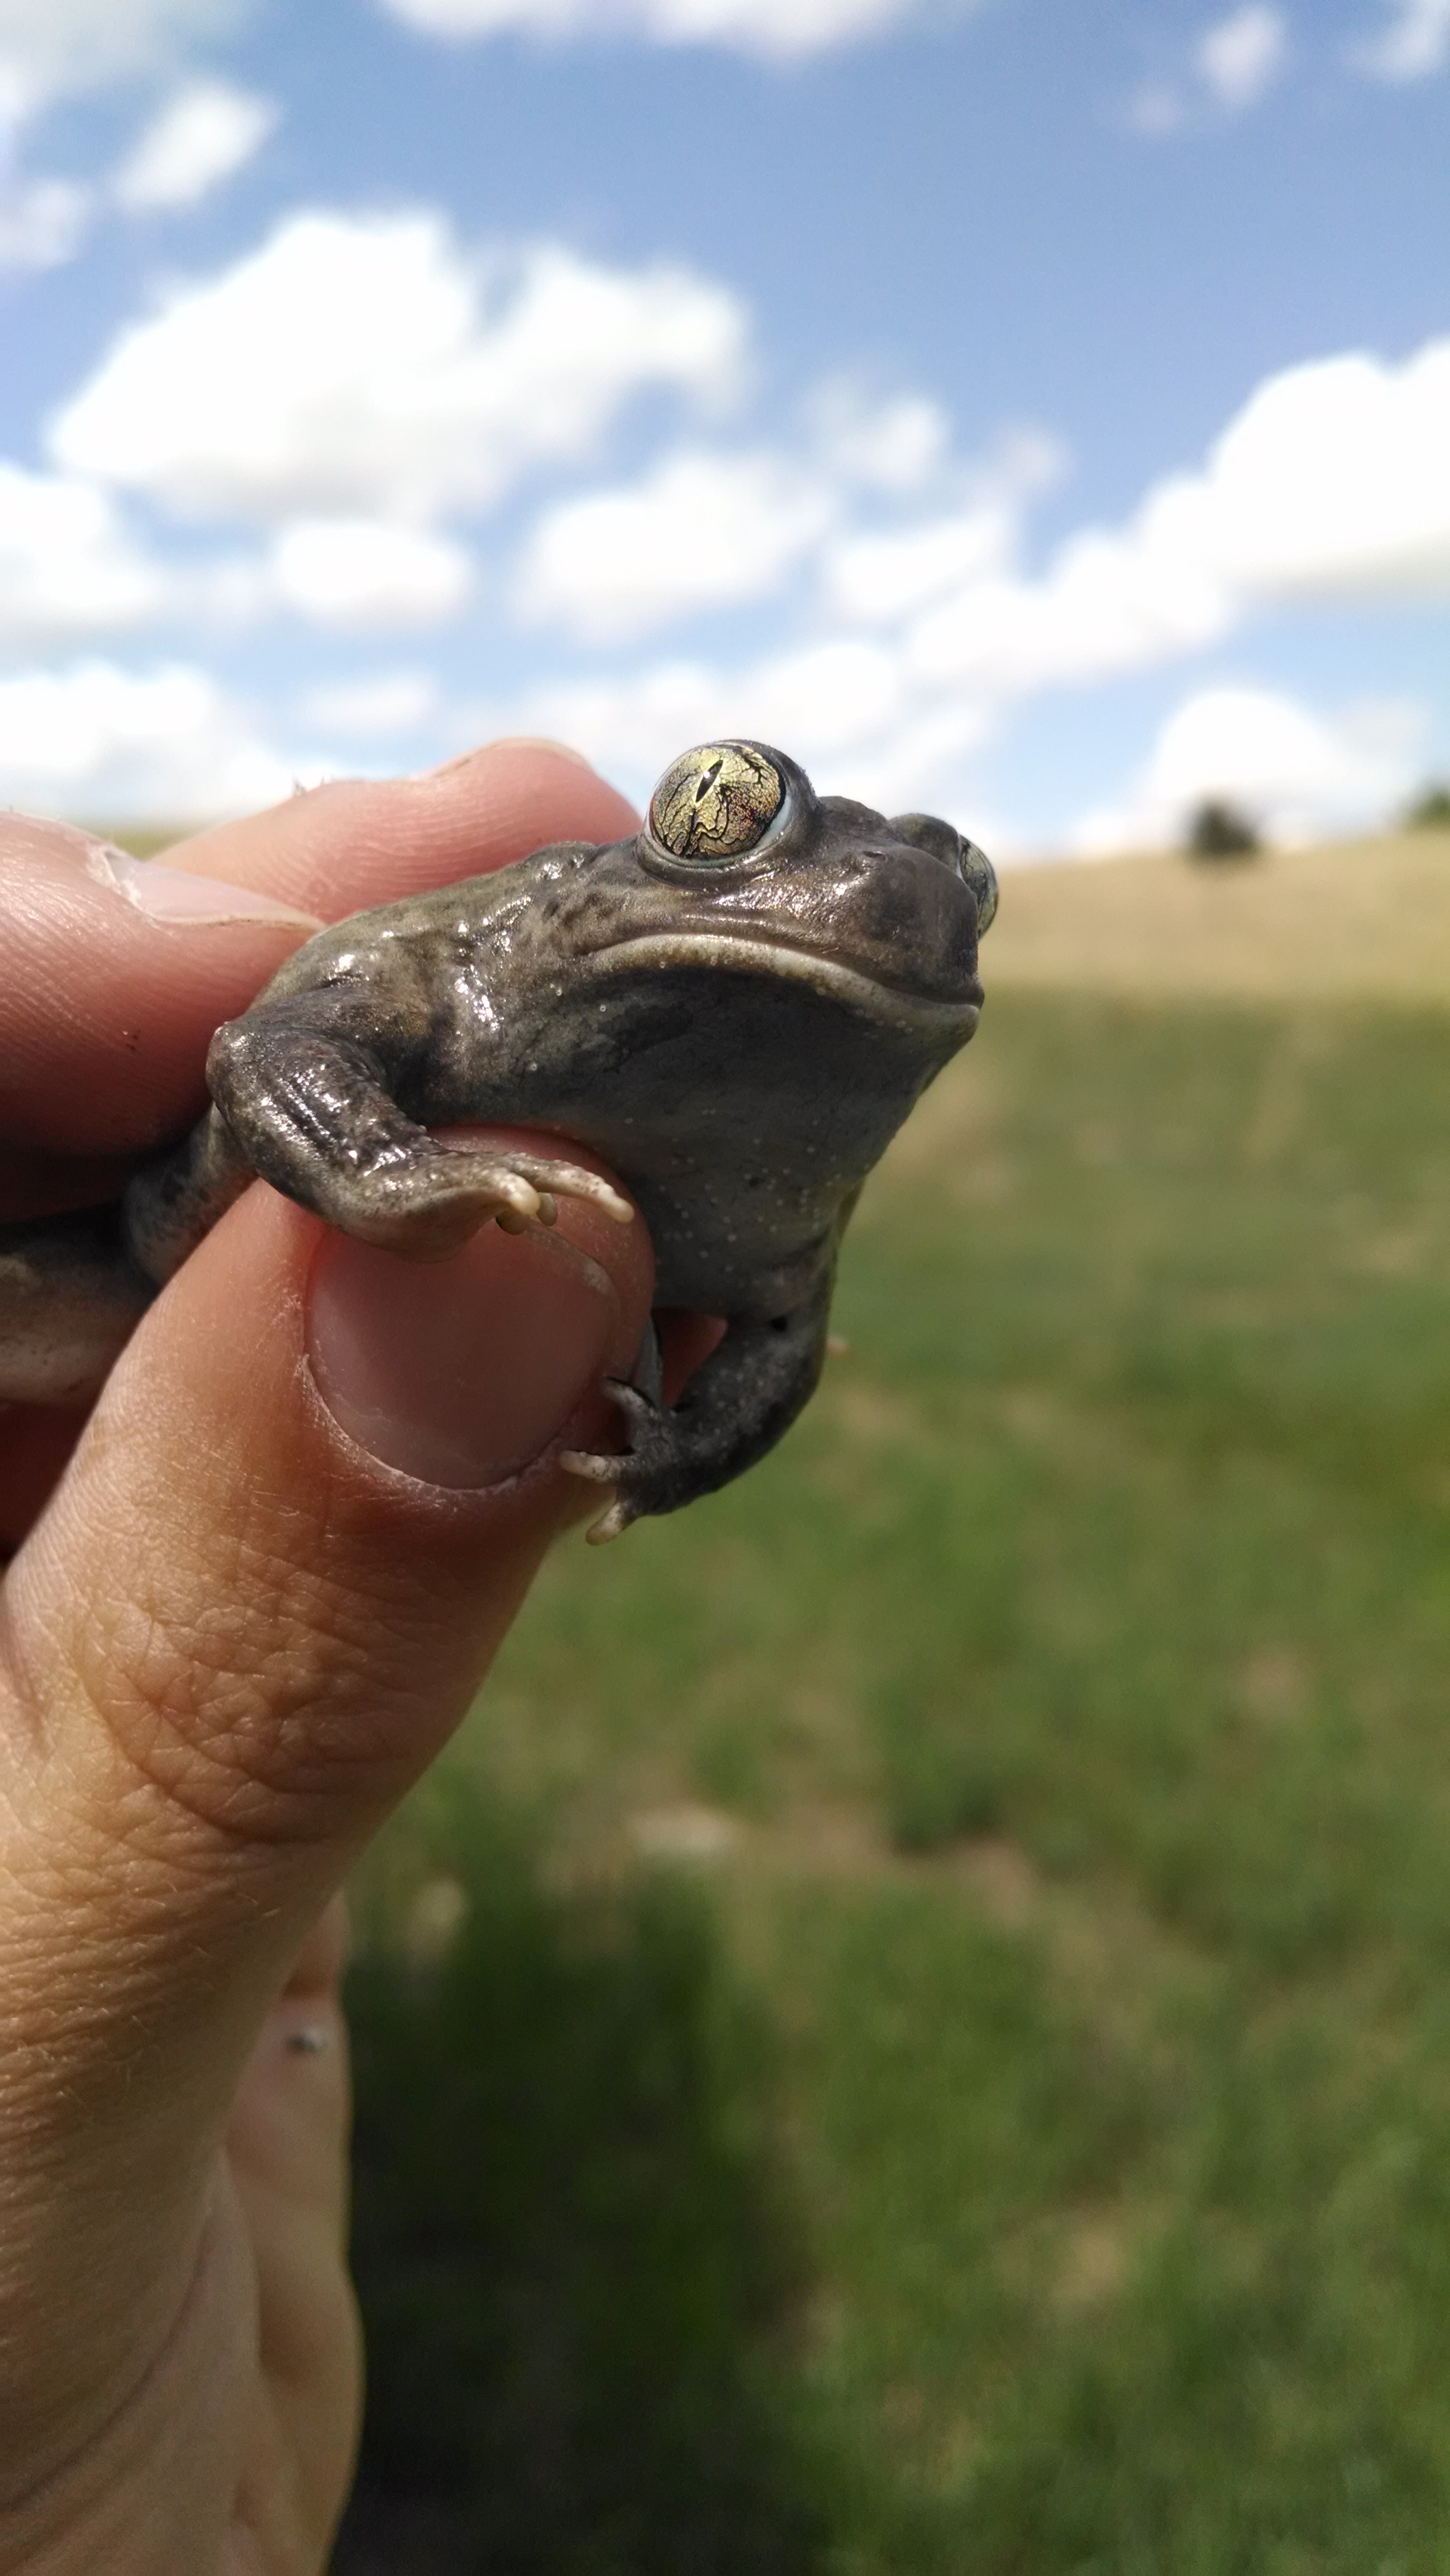 A spadefoot toad.